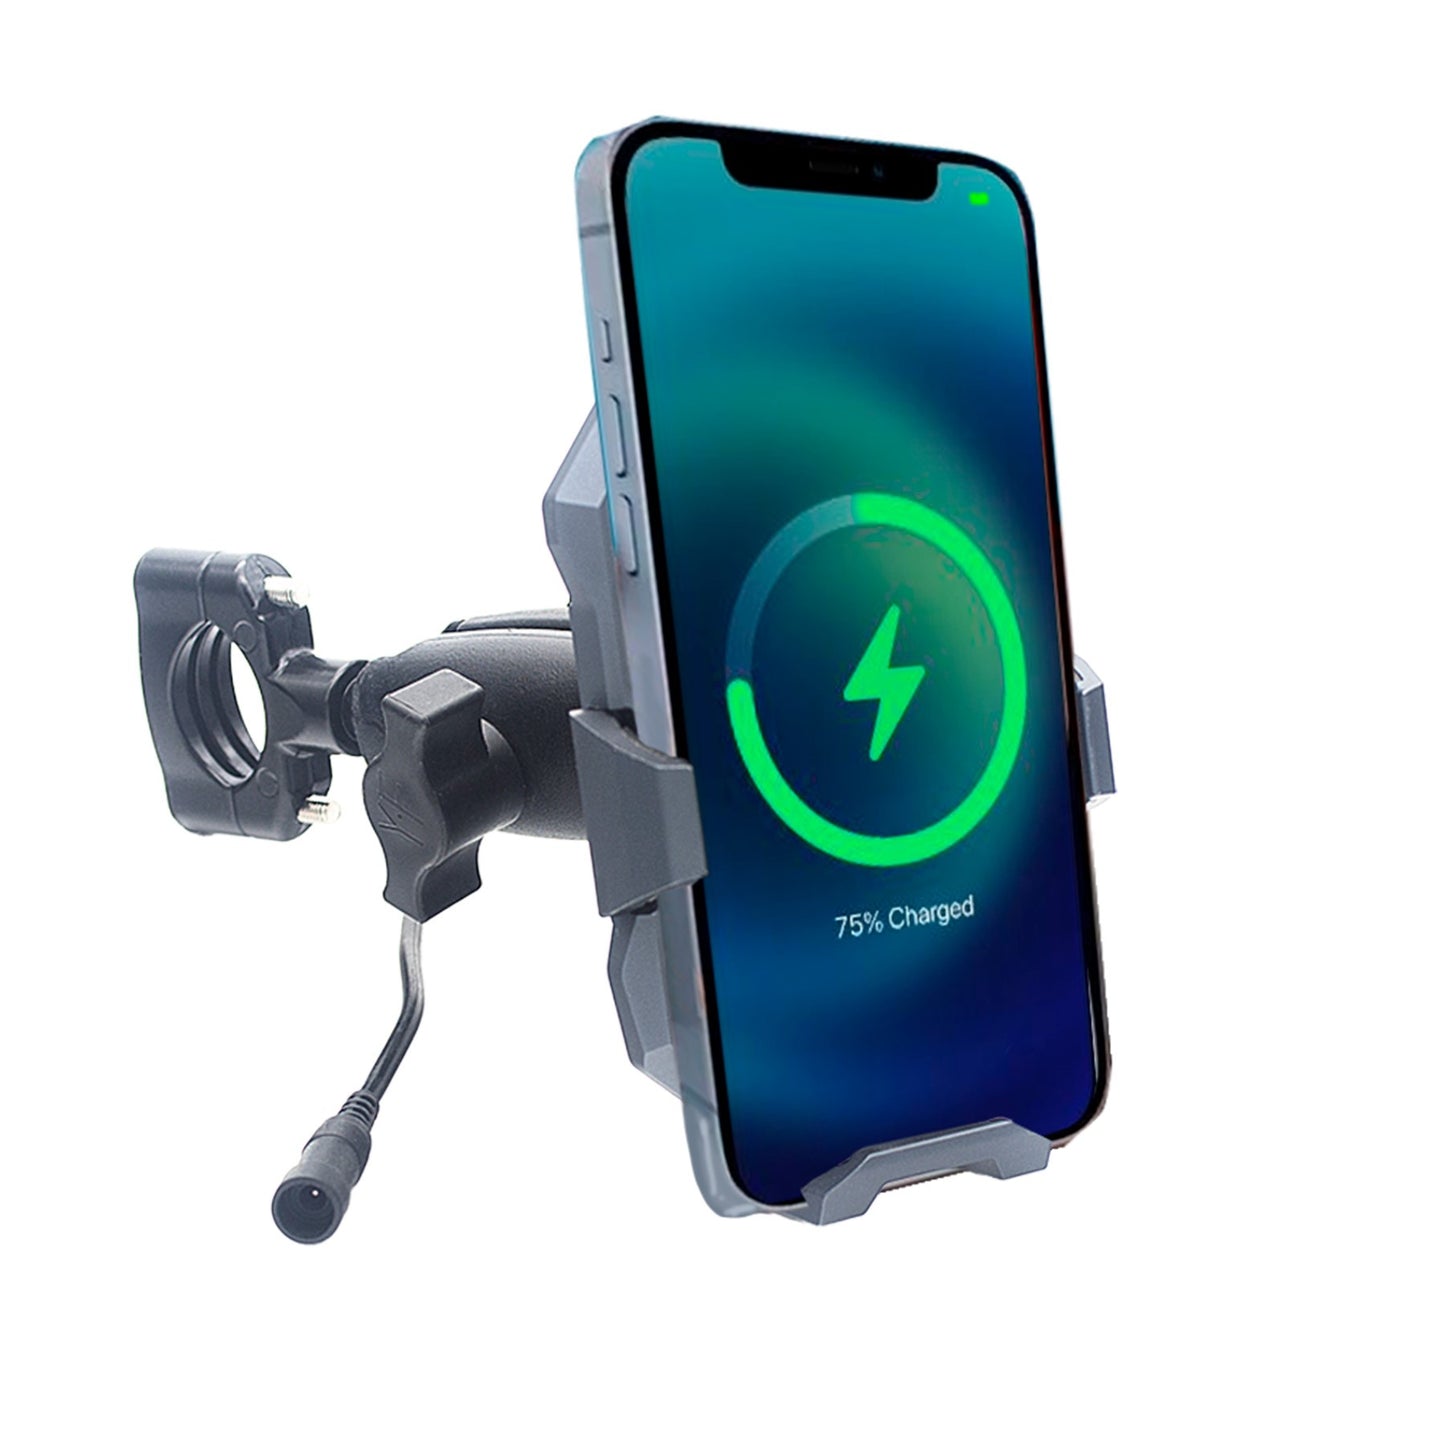 Metal Phone Mount with Inductive Wireless charging, articulating ball mounting & Quick Disconnect Power Cable